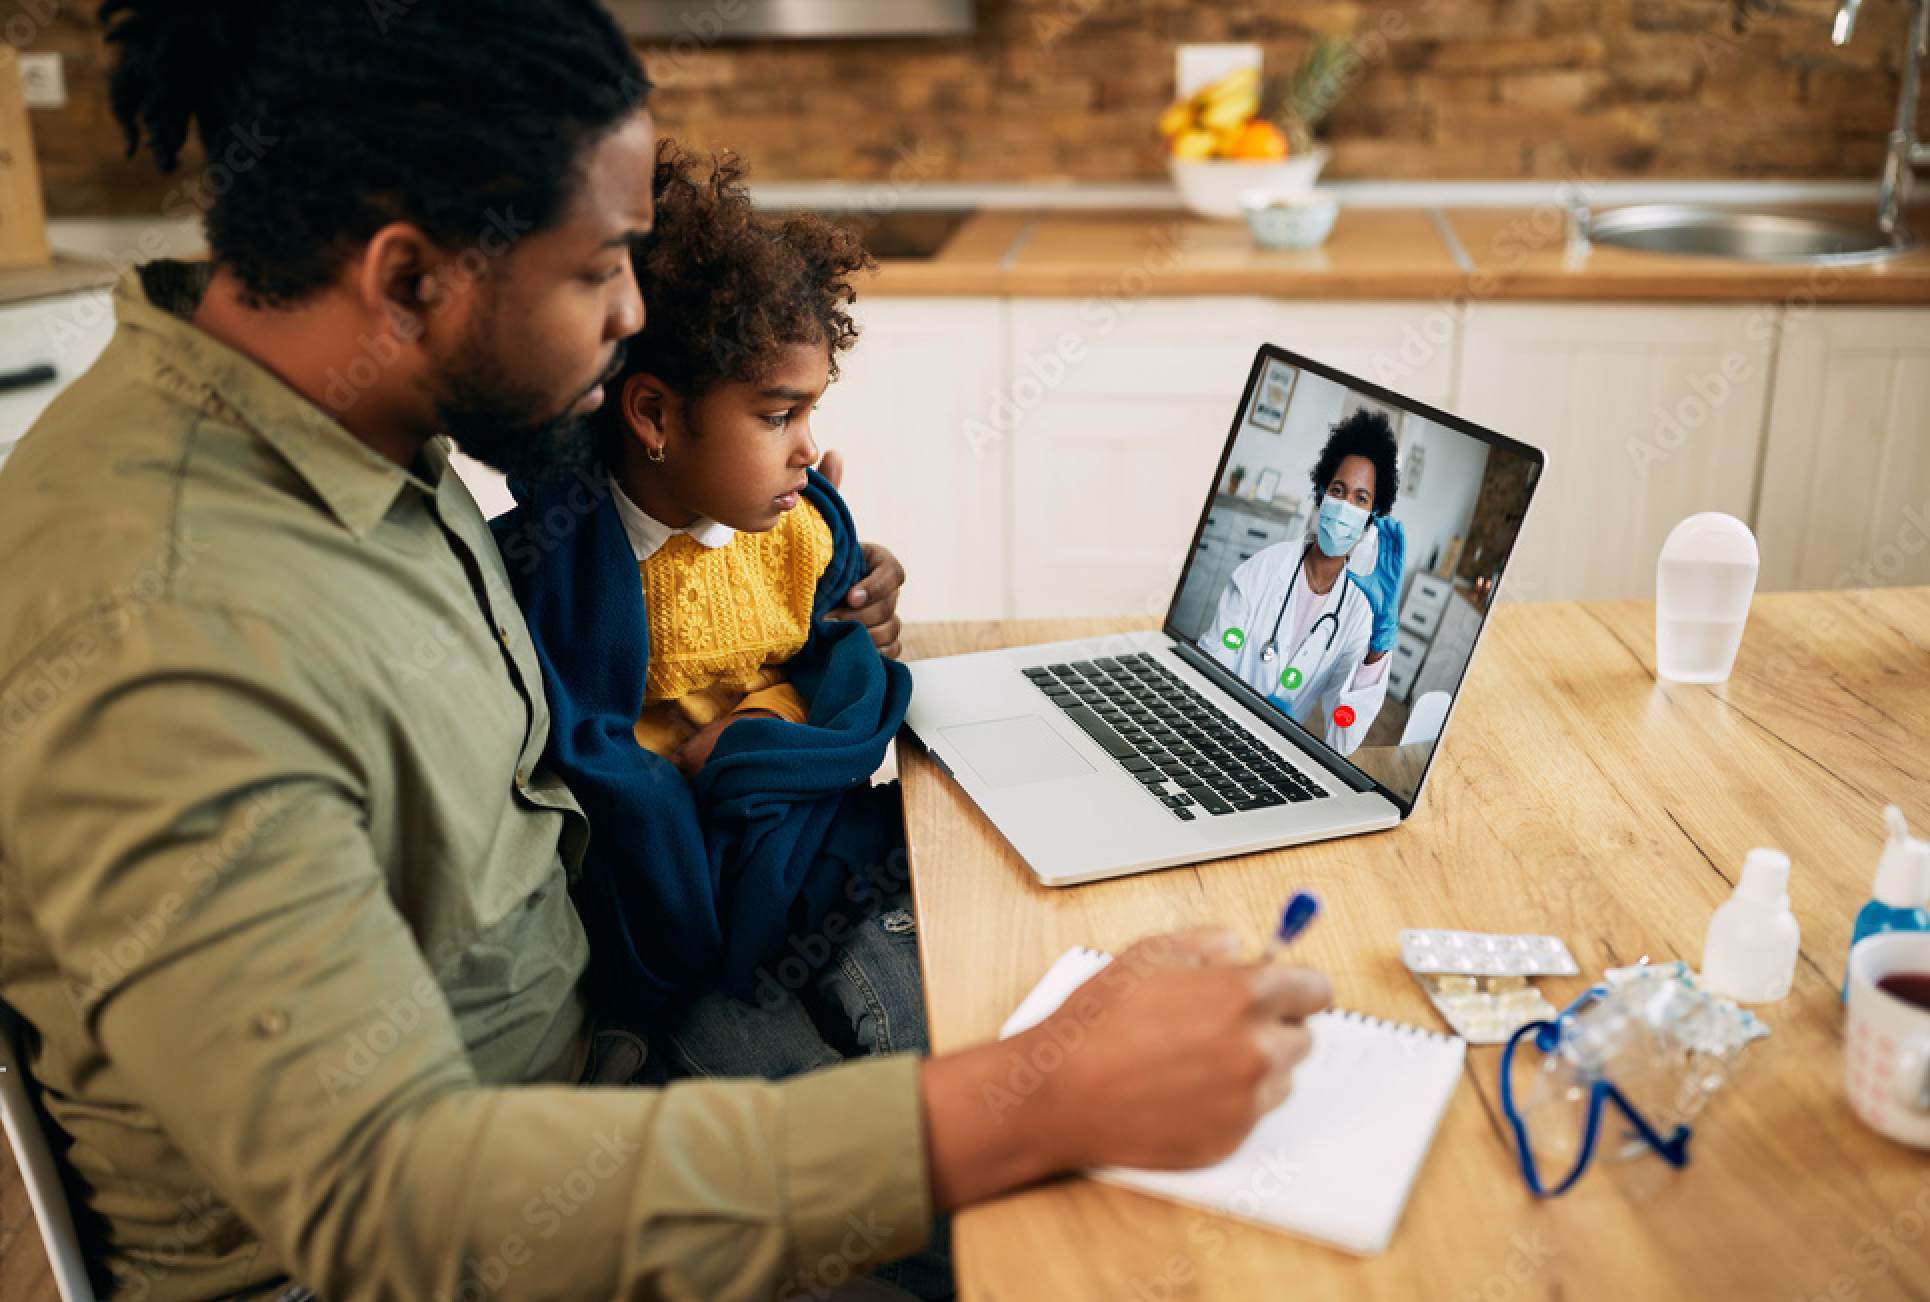 Telemedicine implementation, impact of pandemic on pediatric ophthalmic visits